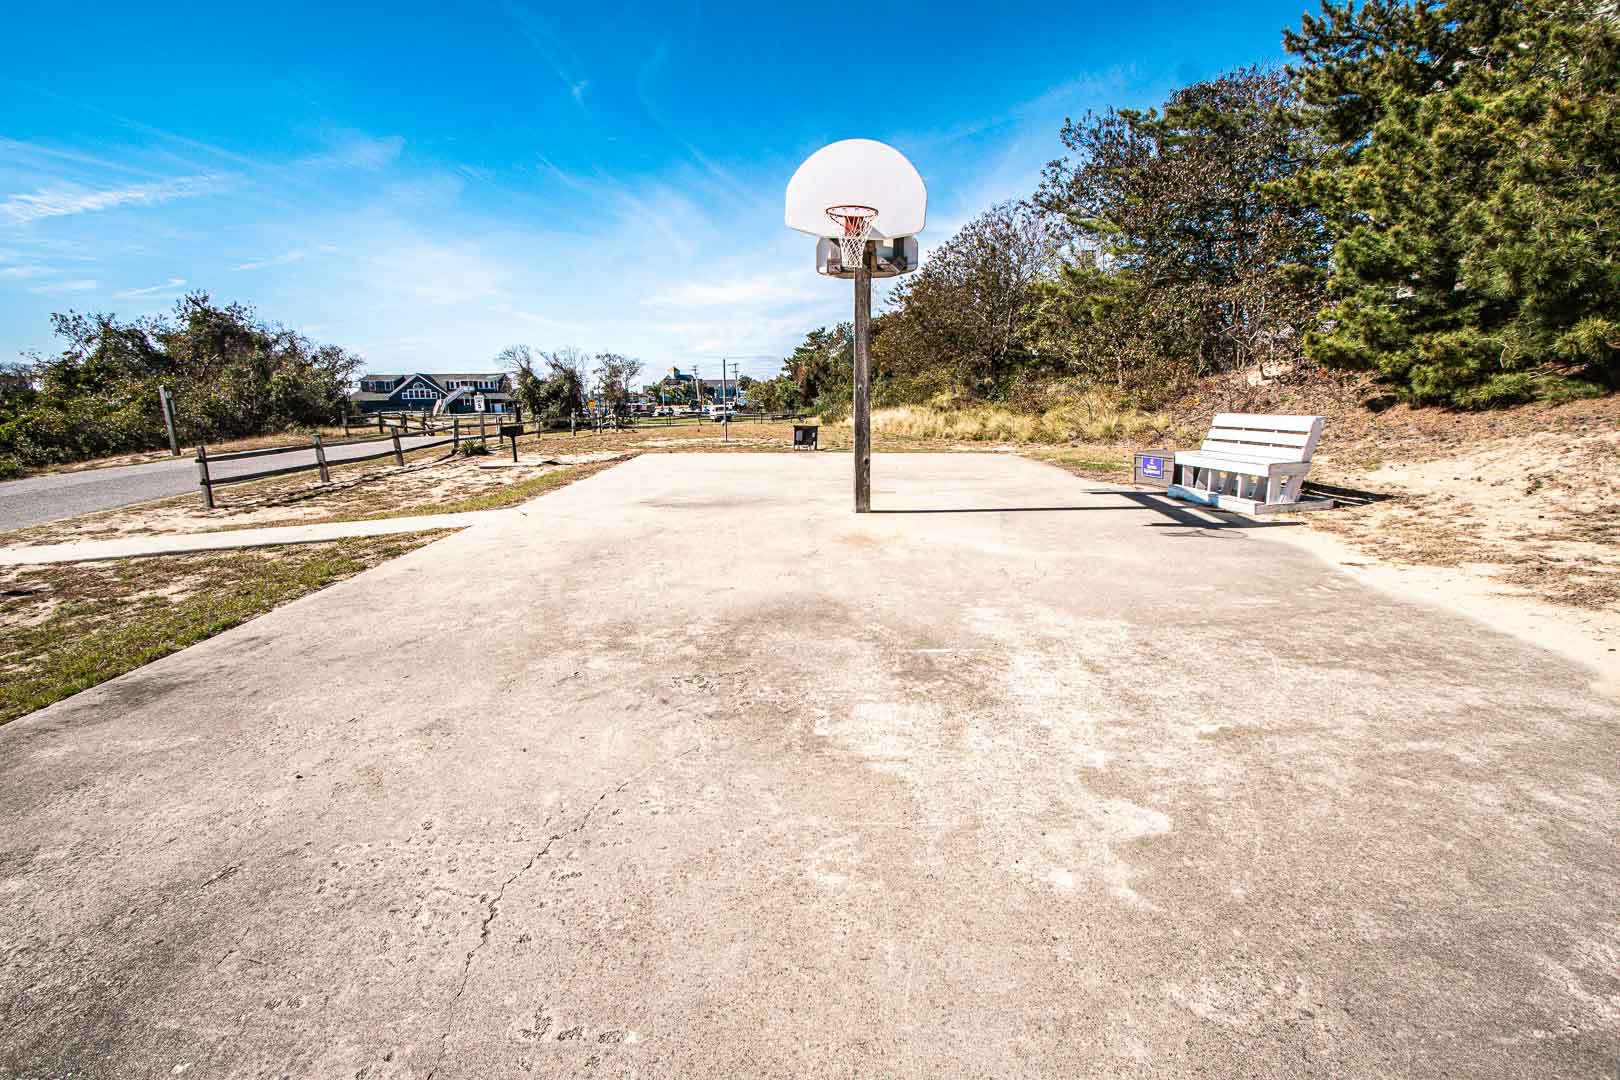 Basketball courts available at VRI's Barrier Island Station in North Carolina.